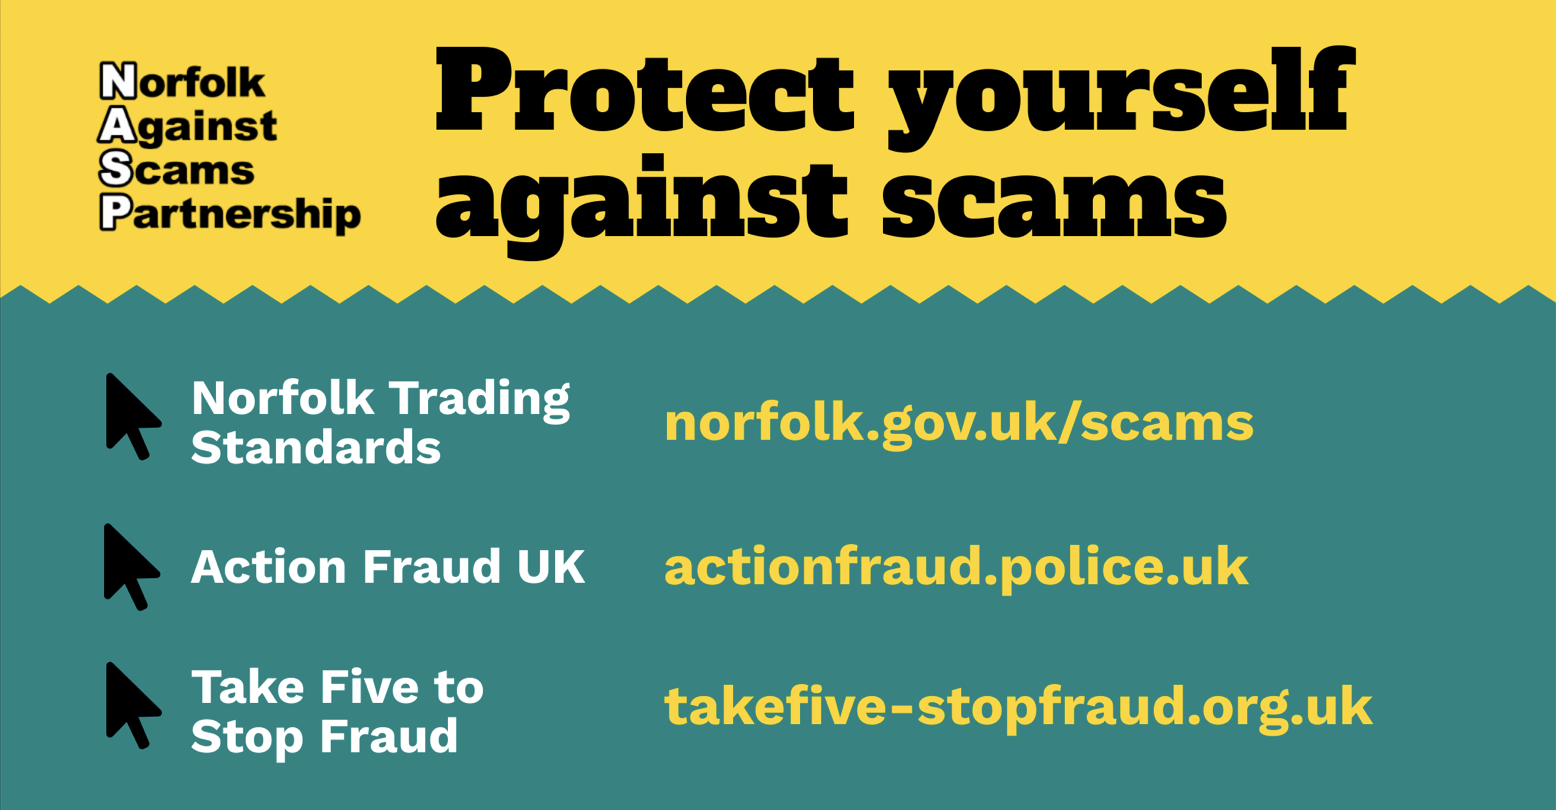 Protect yourself against scams